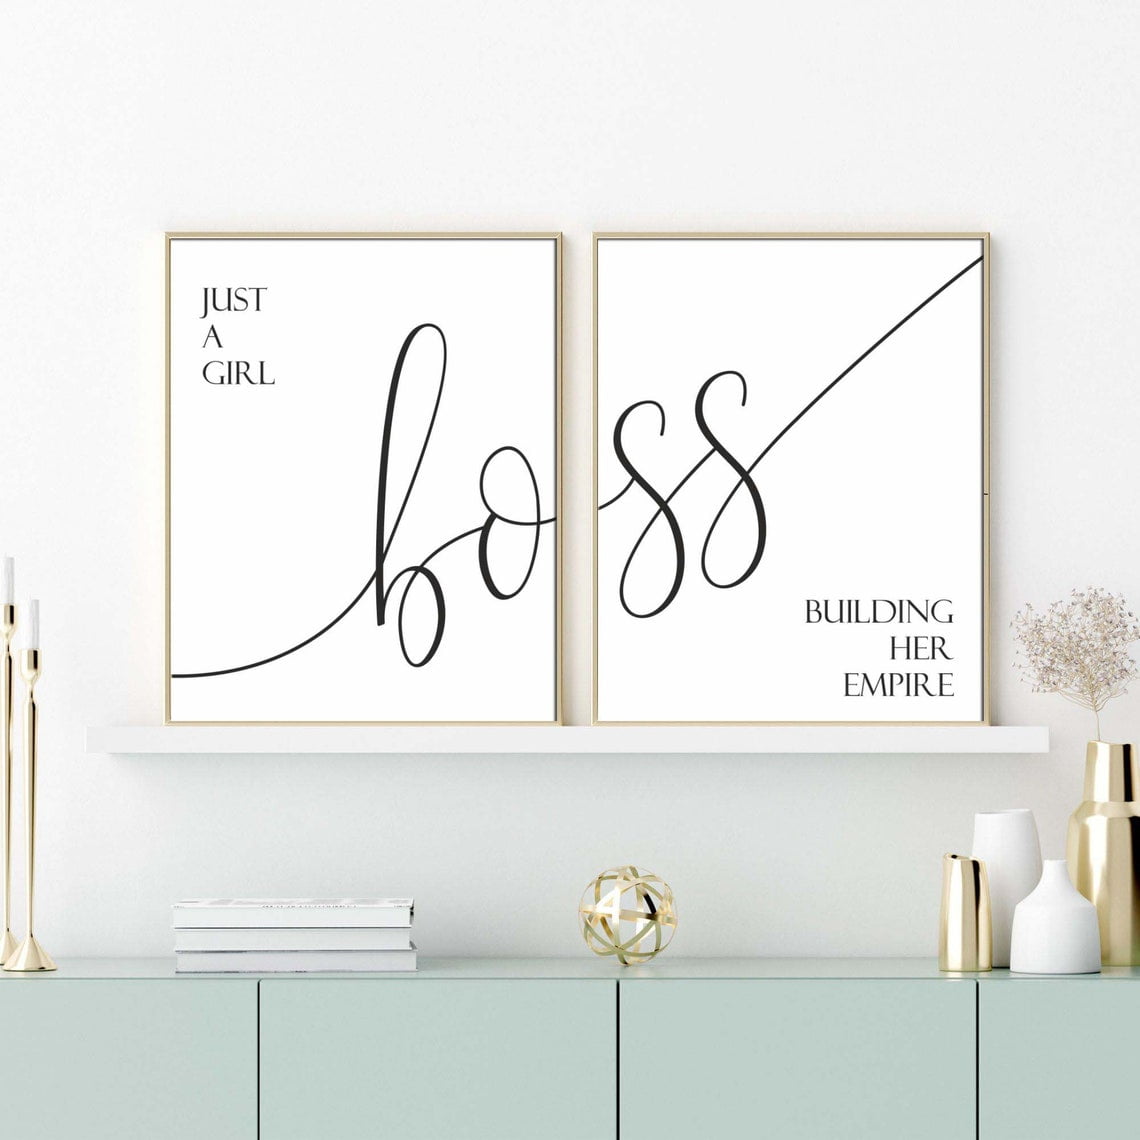 Boss Girl 2 Gift Boss Lady Empire Poster For Just New Building Canvas Unframed Prints Her for Set Office Painting Wall A Art of Decor Office